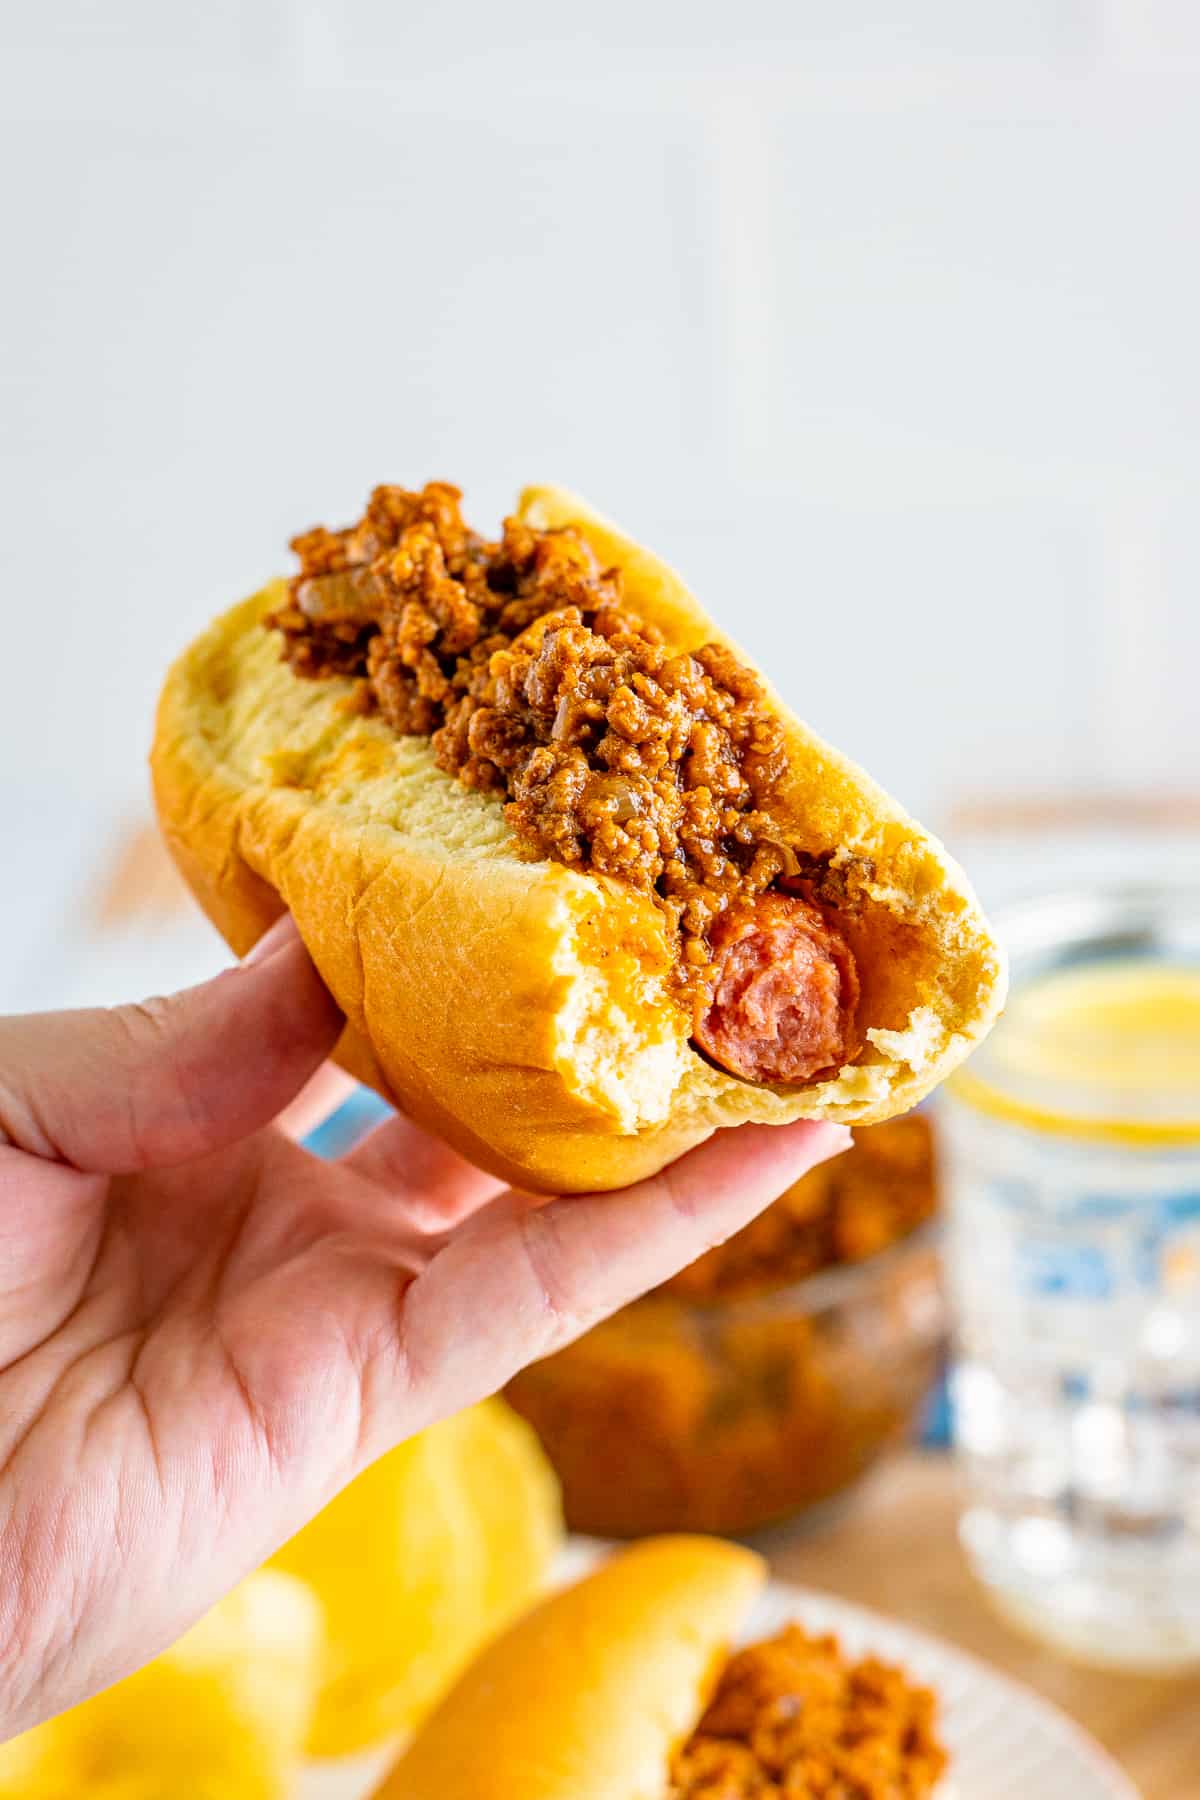 Chili topped hot dog with a bite taken out of it.